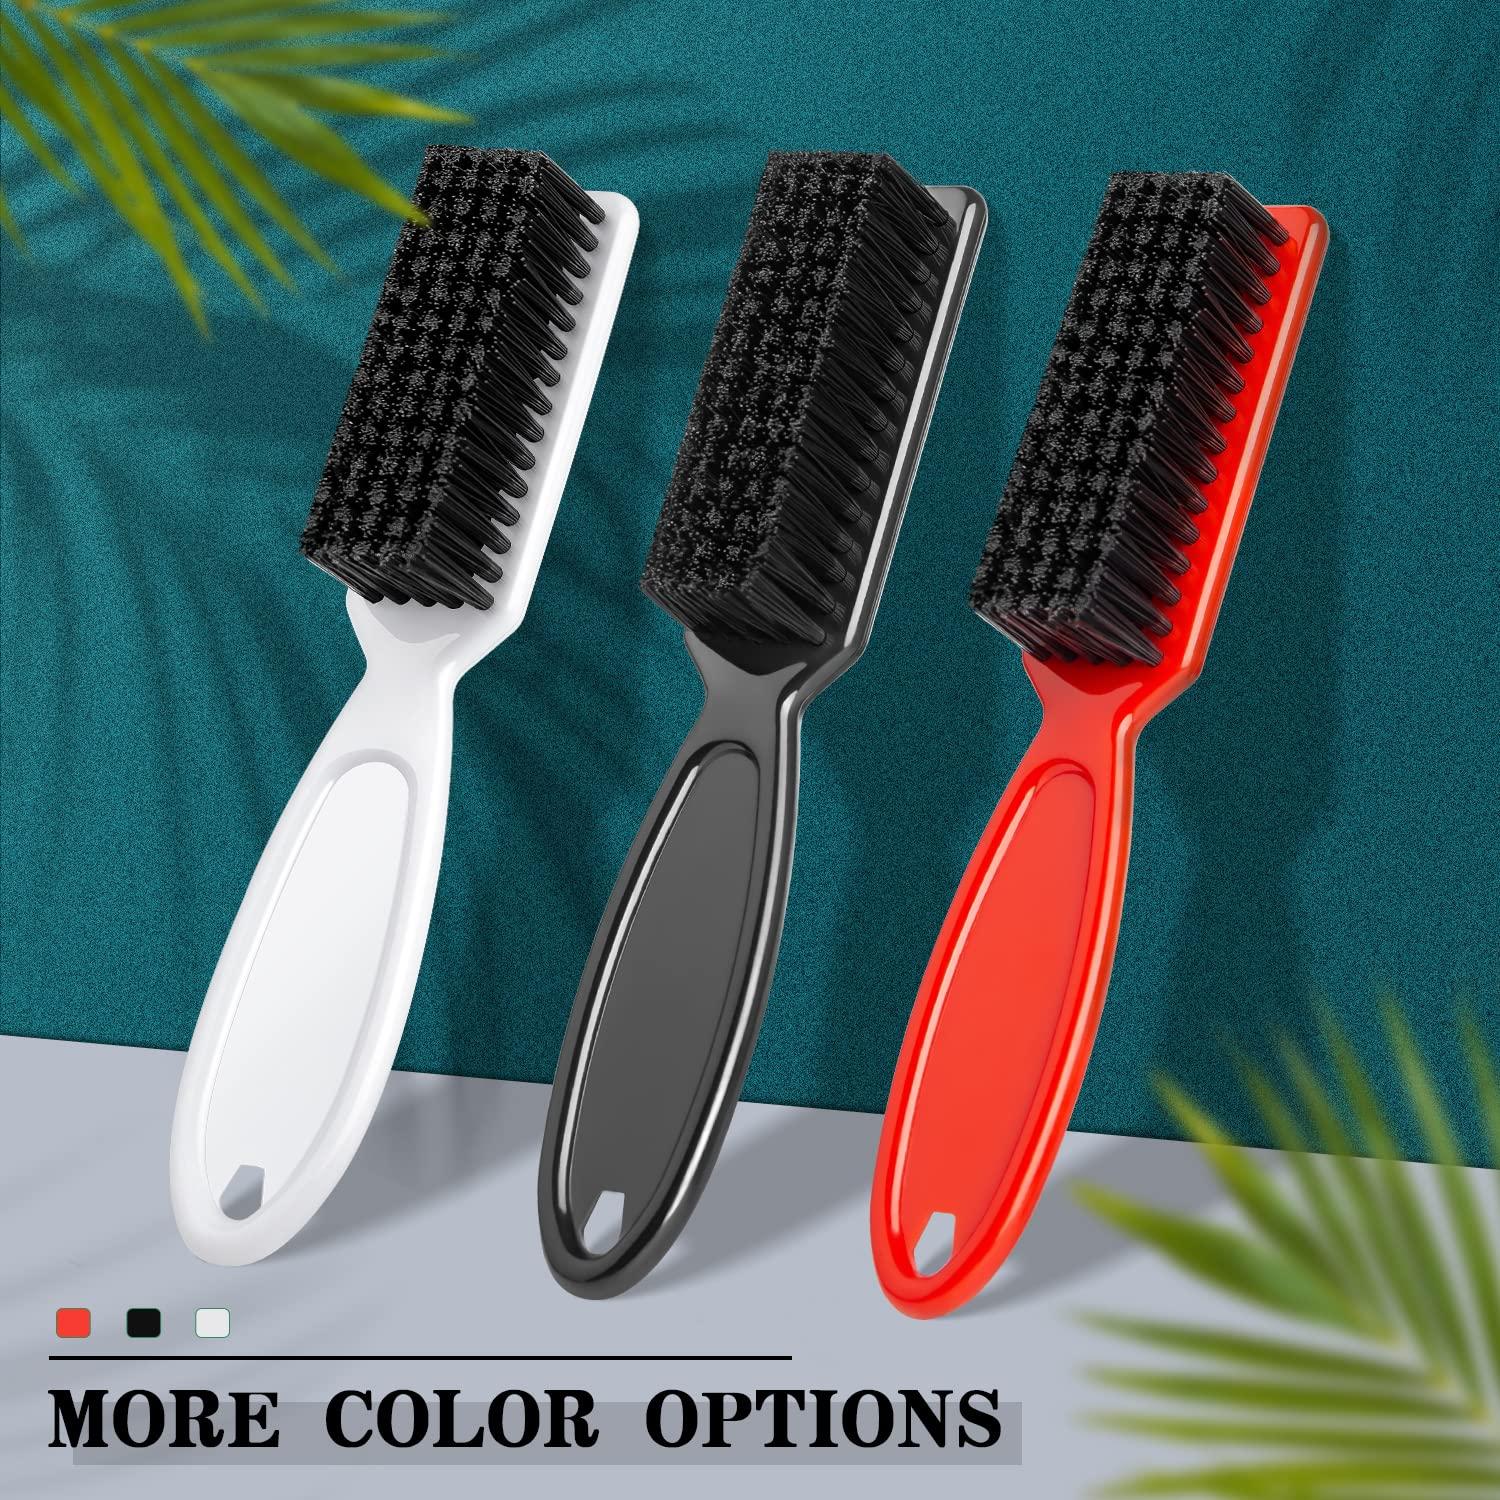 2 Pieces Barber Blade Cleaning Brush Hair Clipper Brush Nail Brush Tool for  Cleaning Clipper (Black)